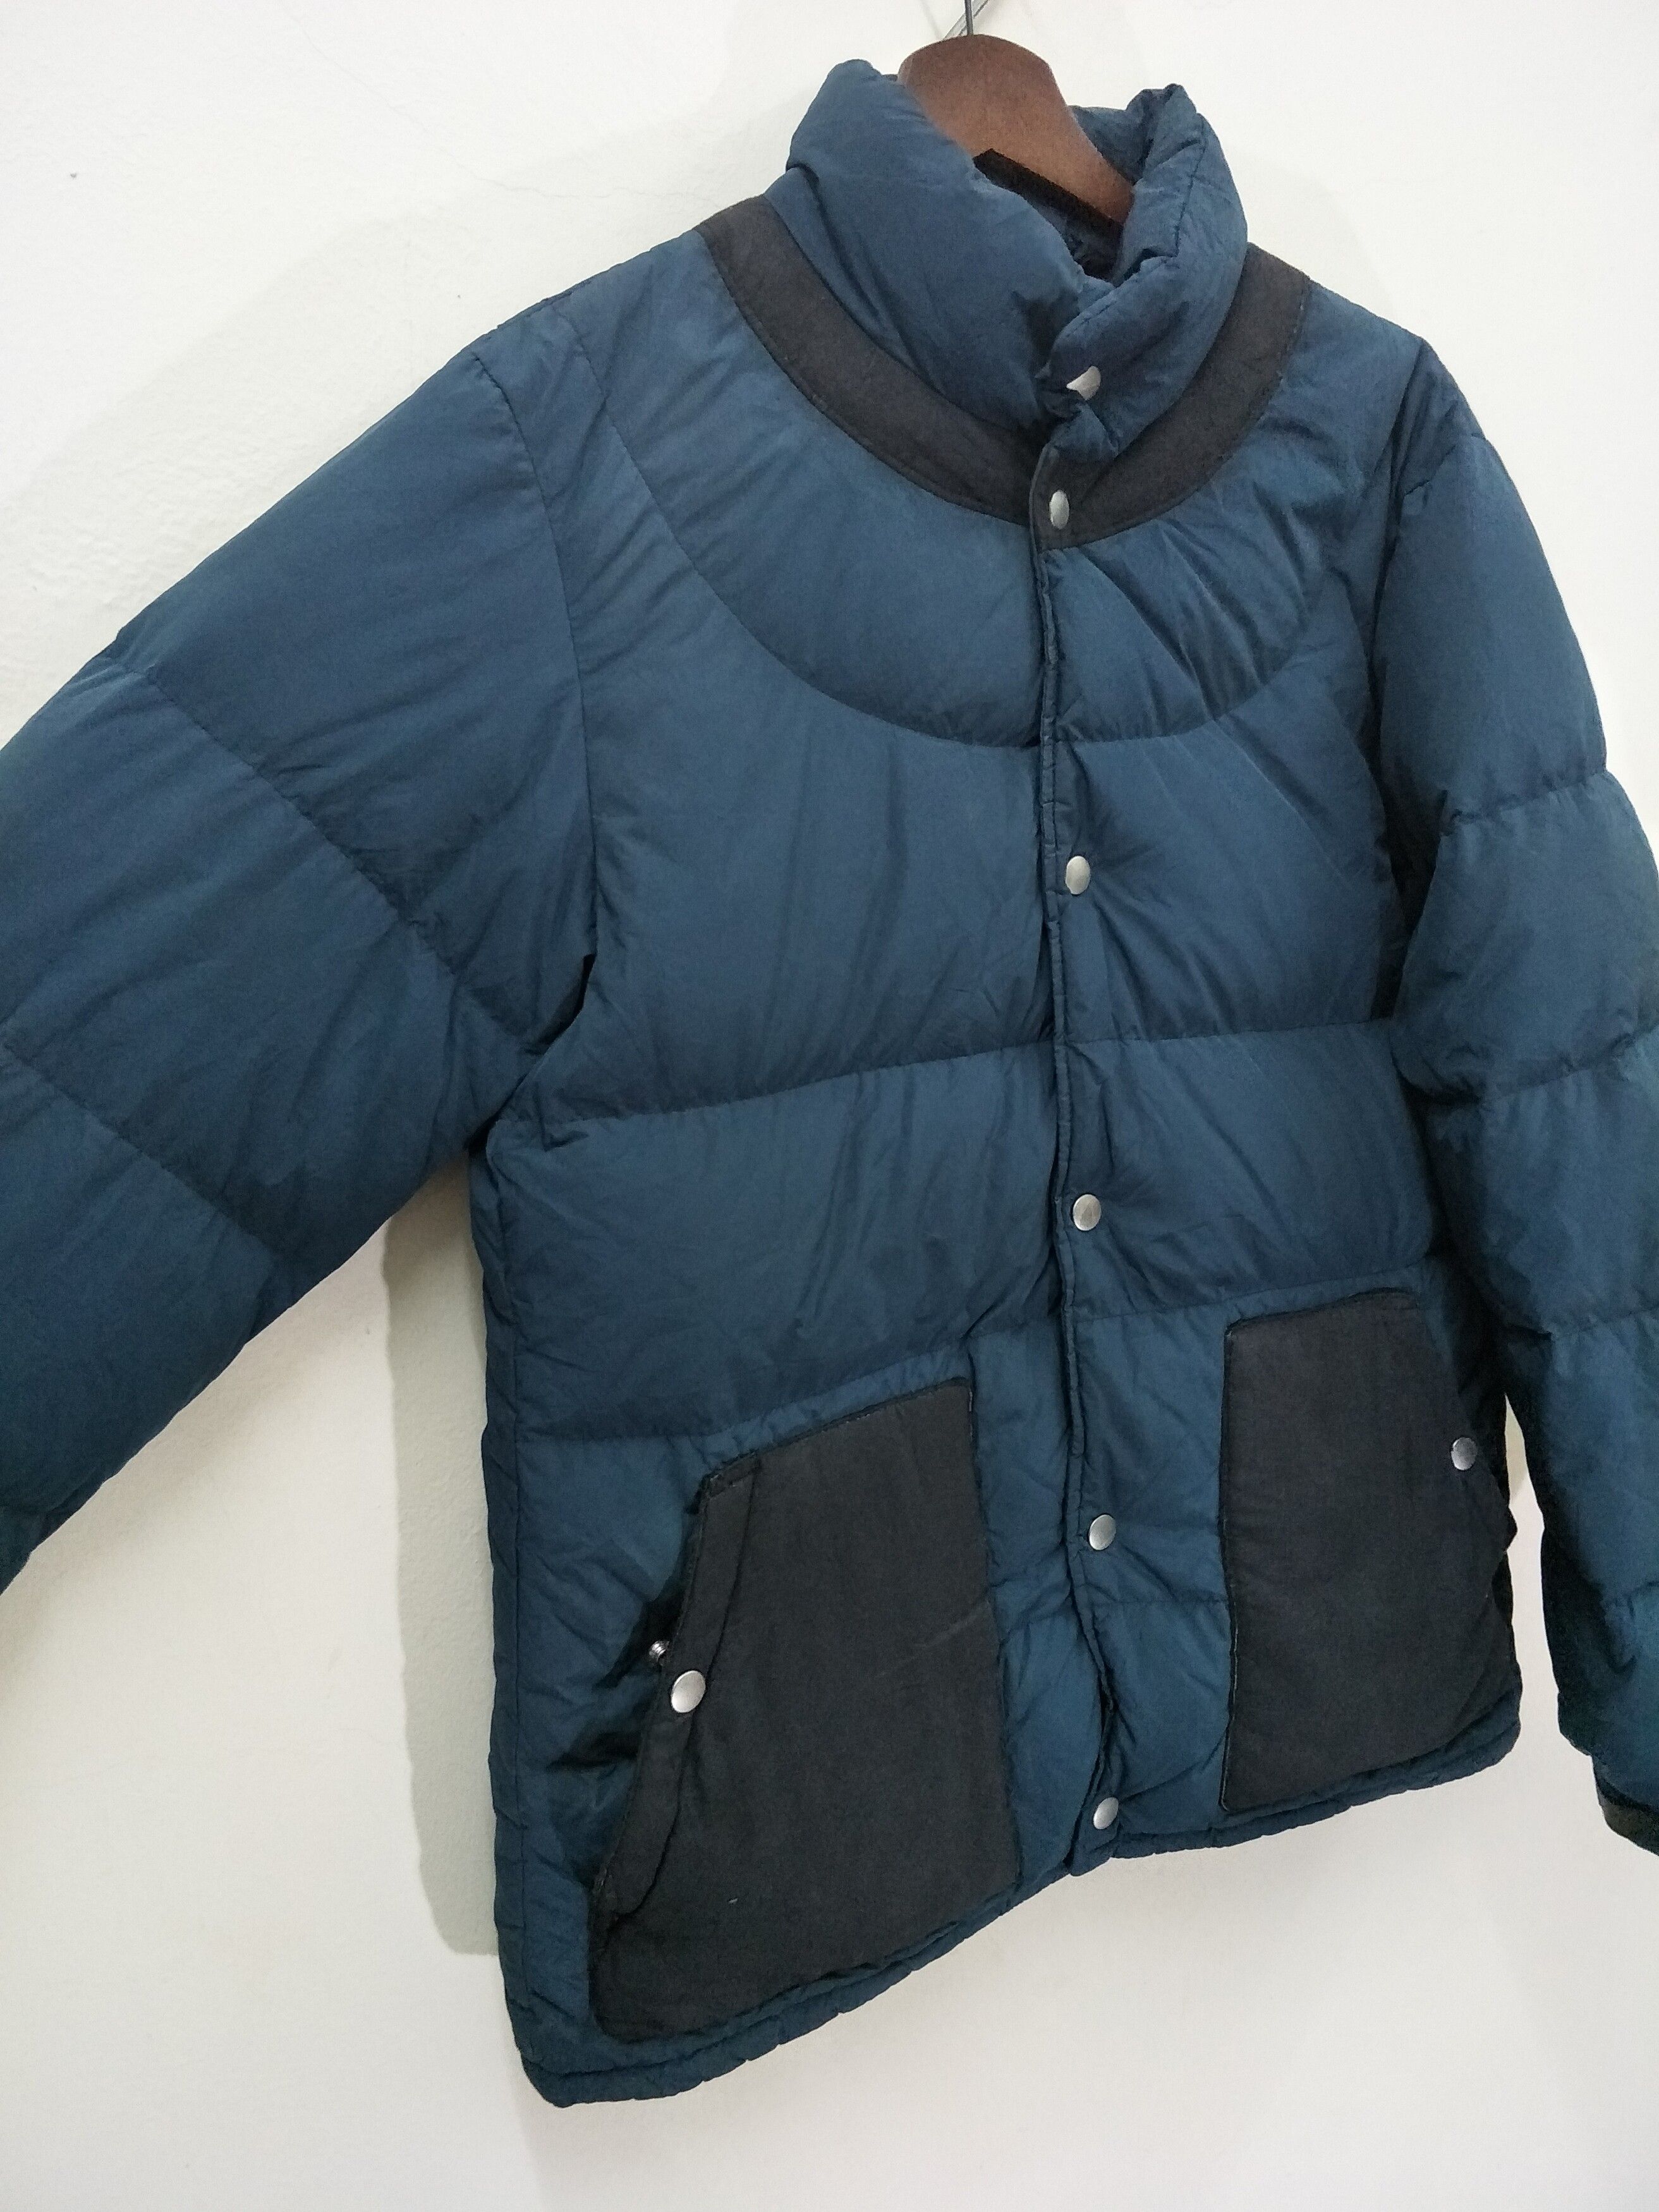 Undercover x Uniqlo Puffer Down Jacket - 4